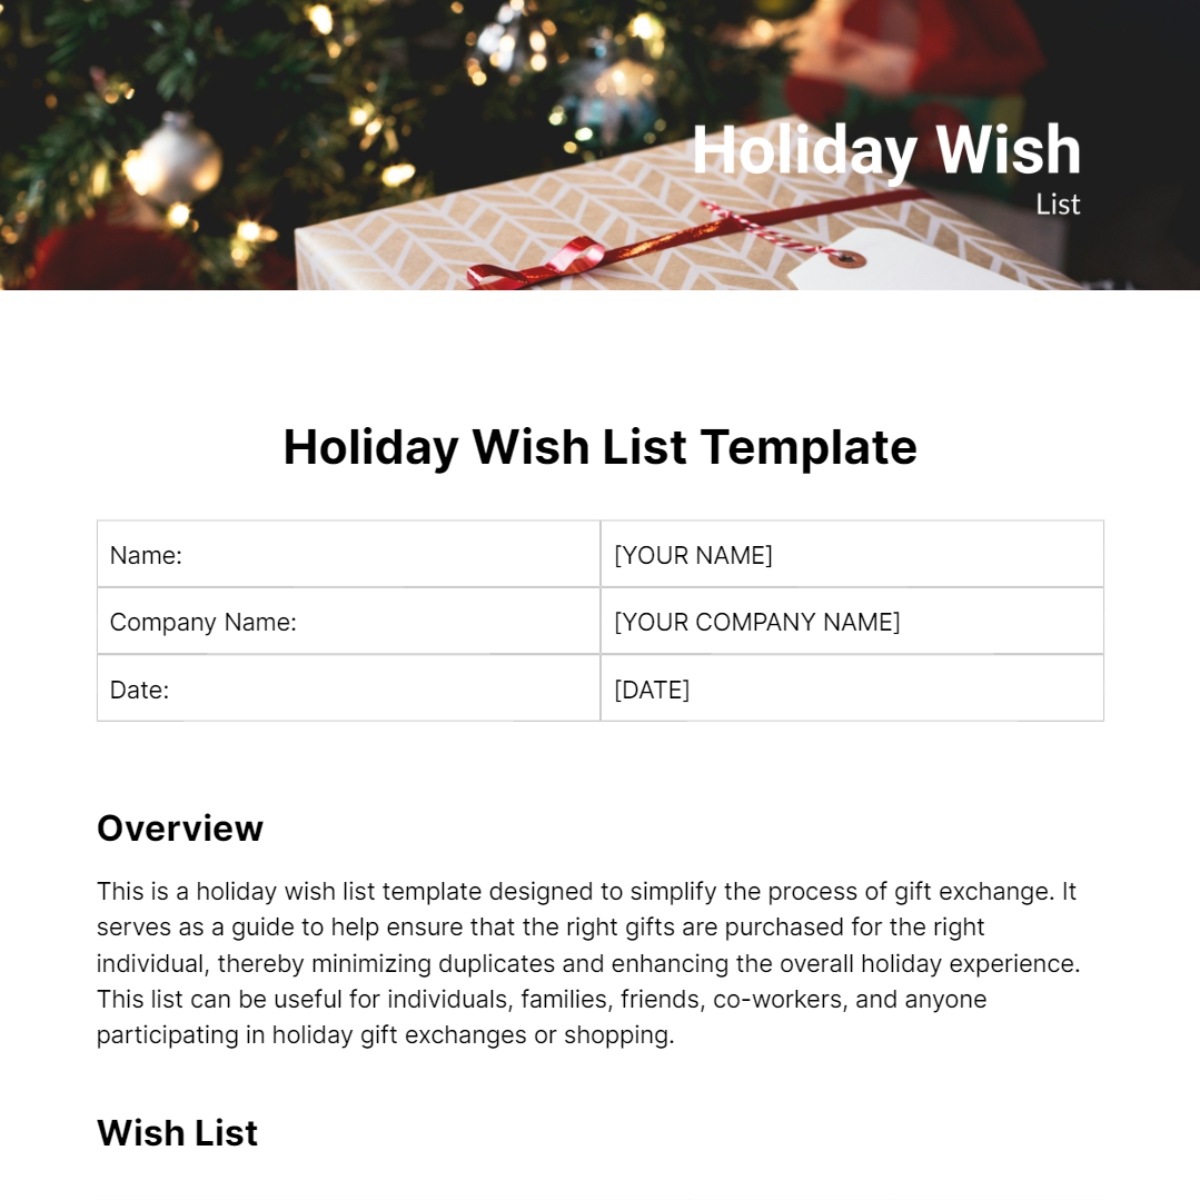 Holiday Wish List Template